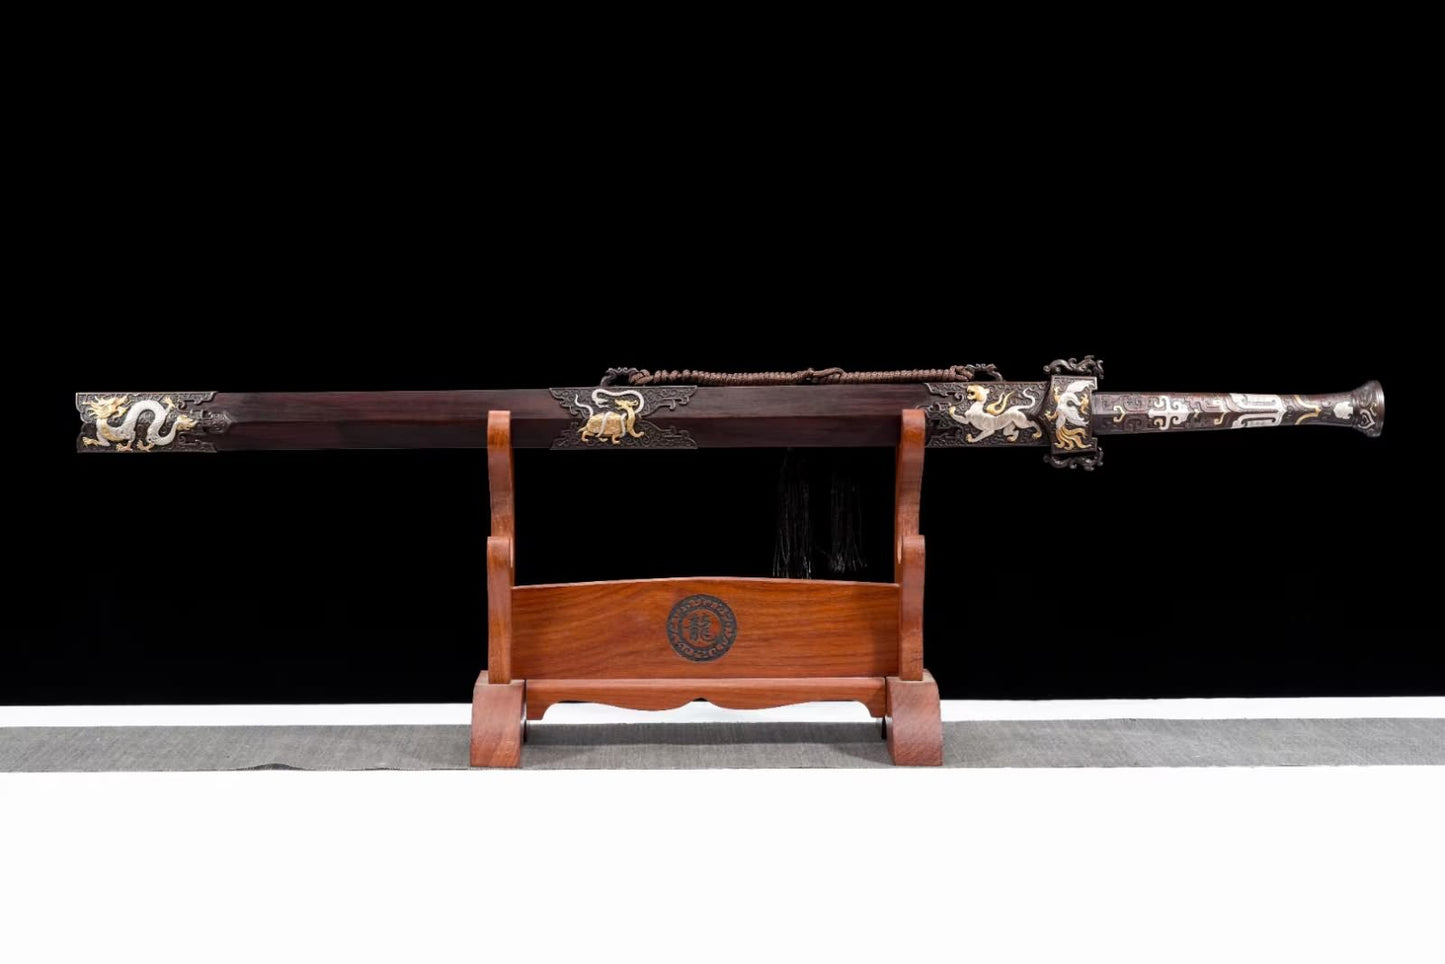 Handcrafted Chinese Han Sword with Forged Damascus Steel Blade - Antique Brass Fittings and Ebony Wood Scabbard